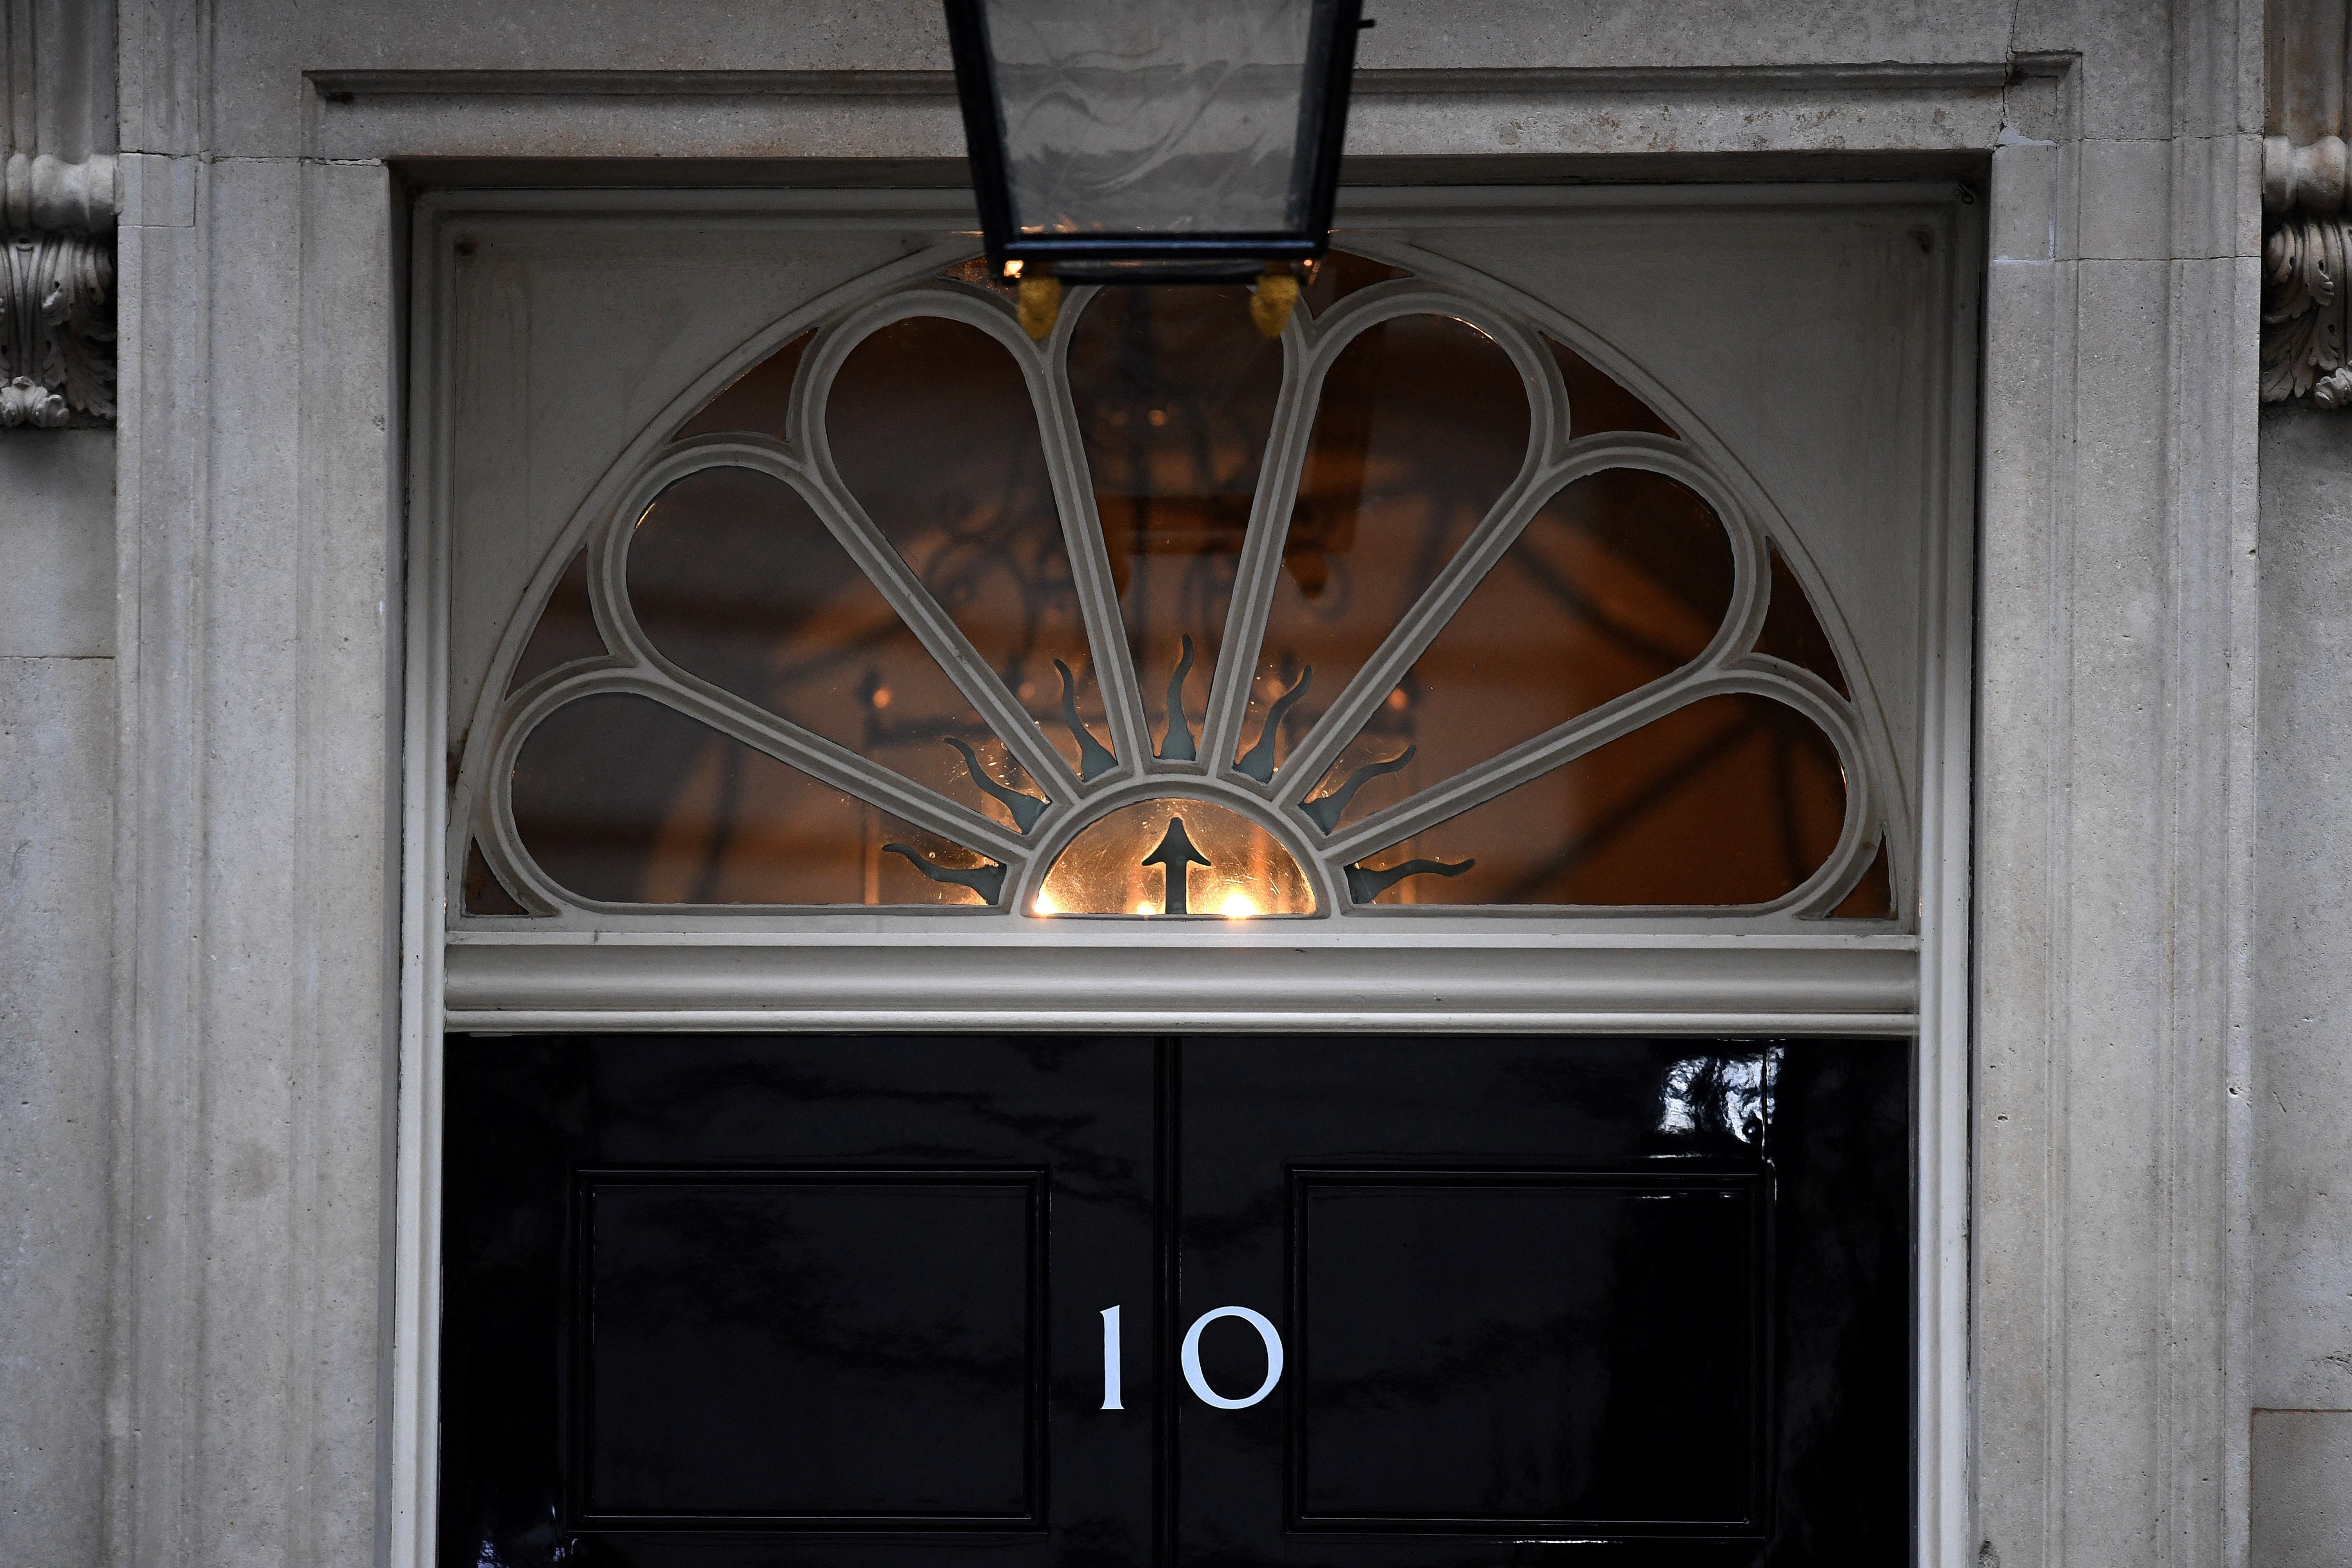 10 Downing Street has come under scrutiny over lockdown parties